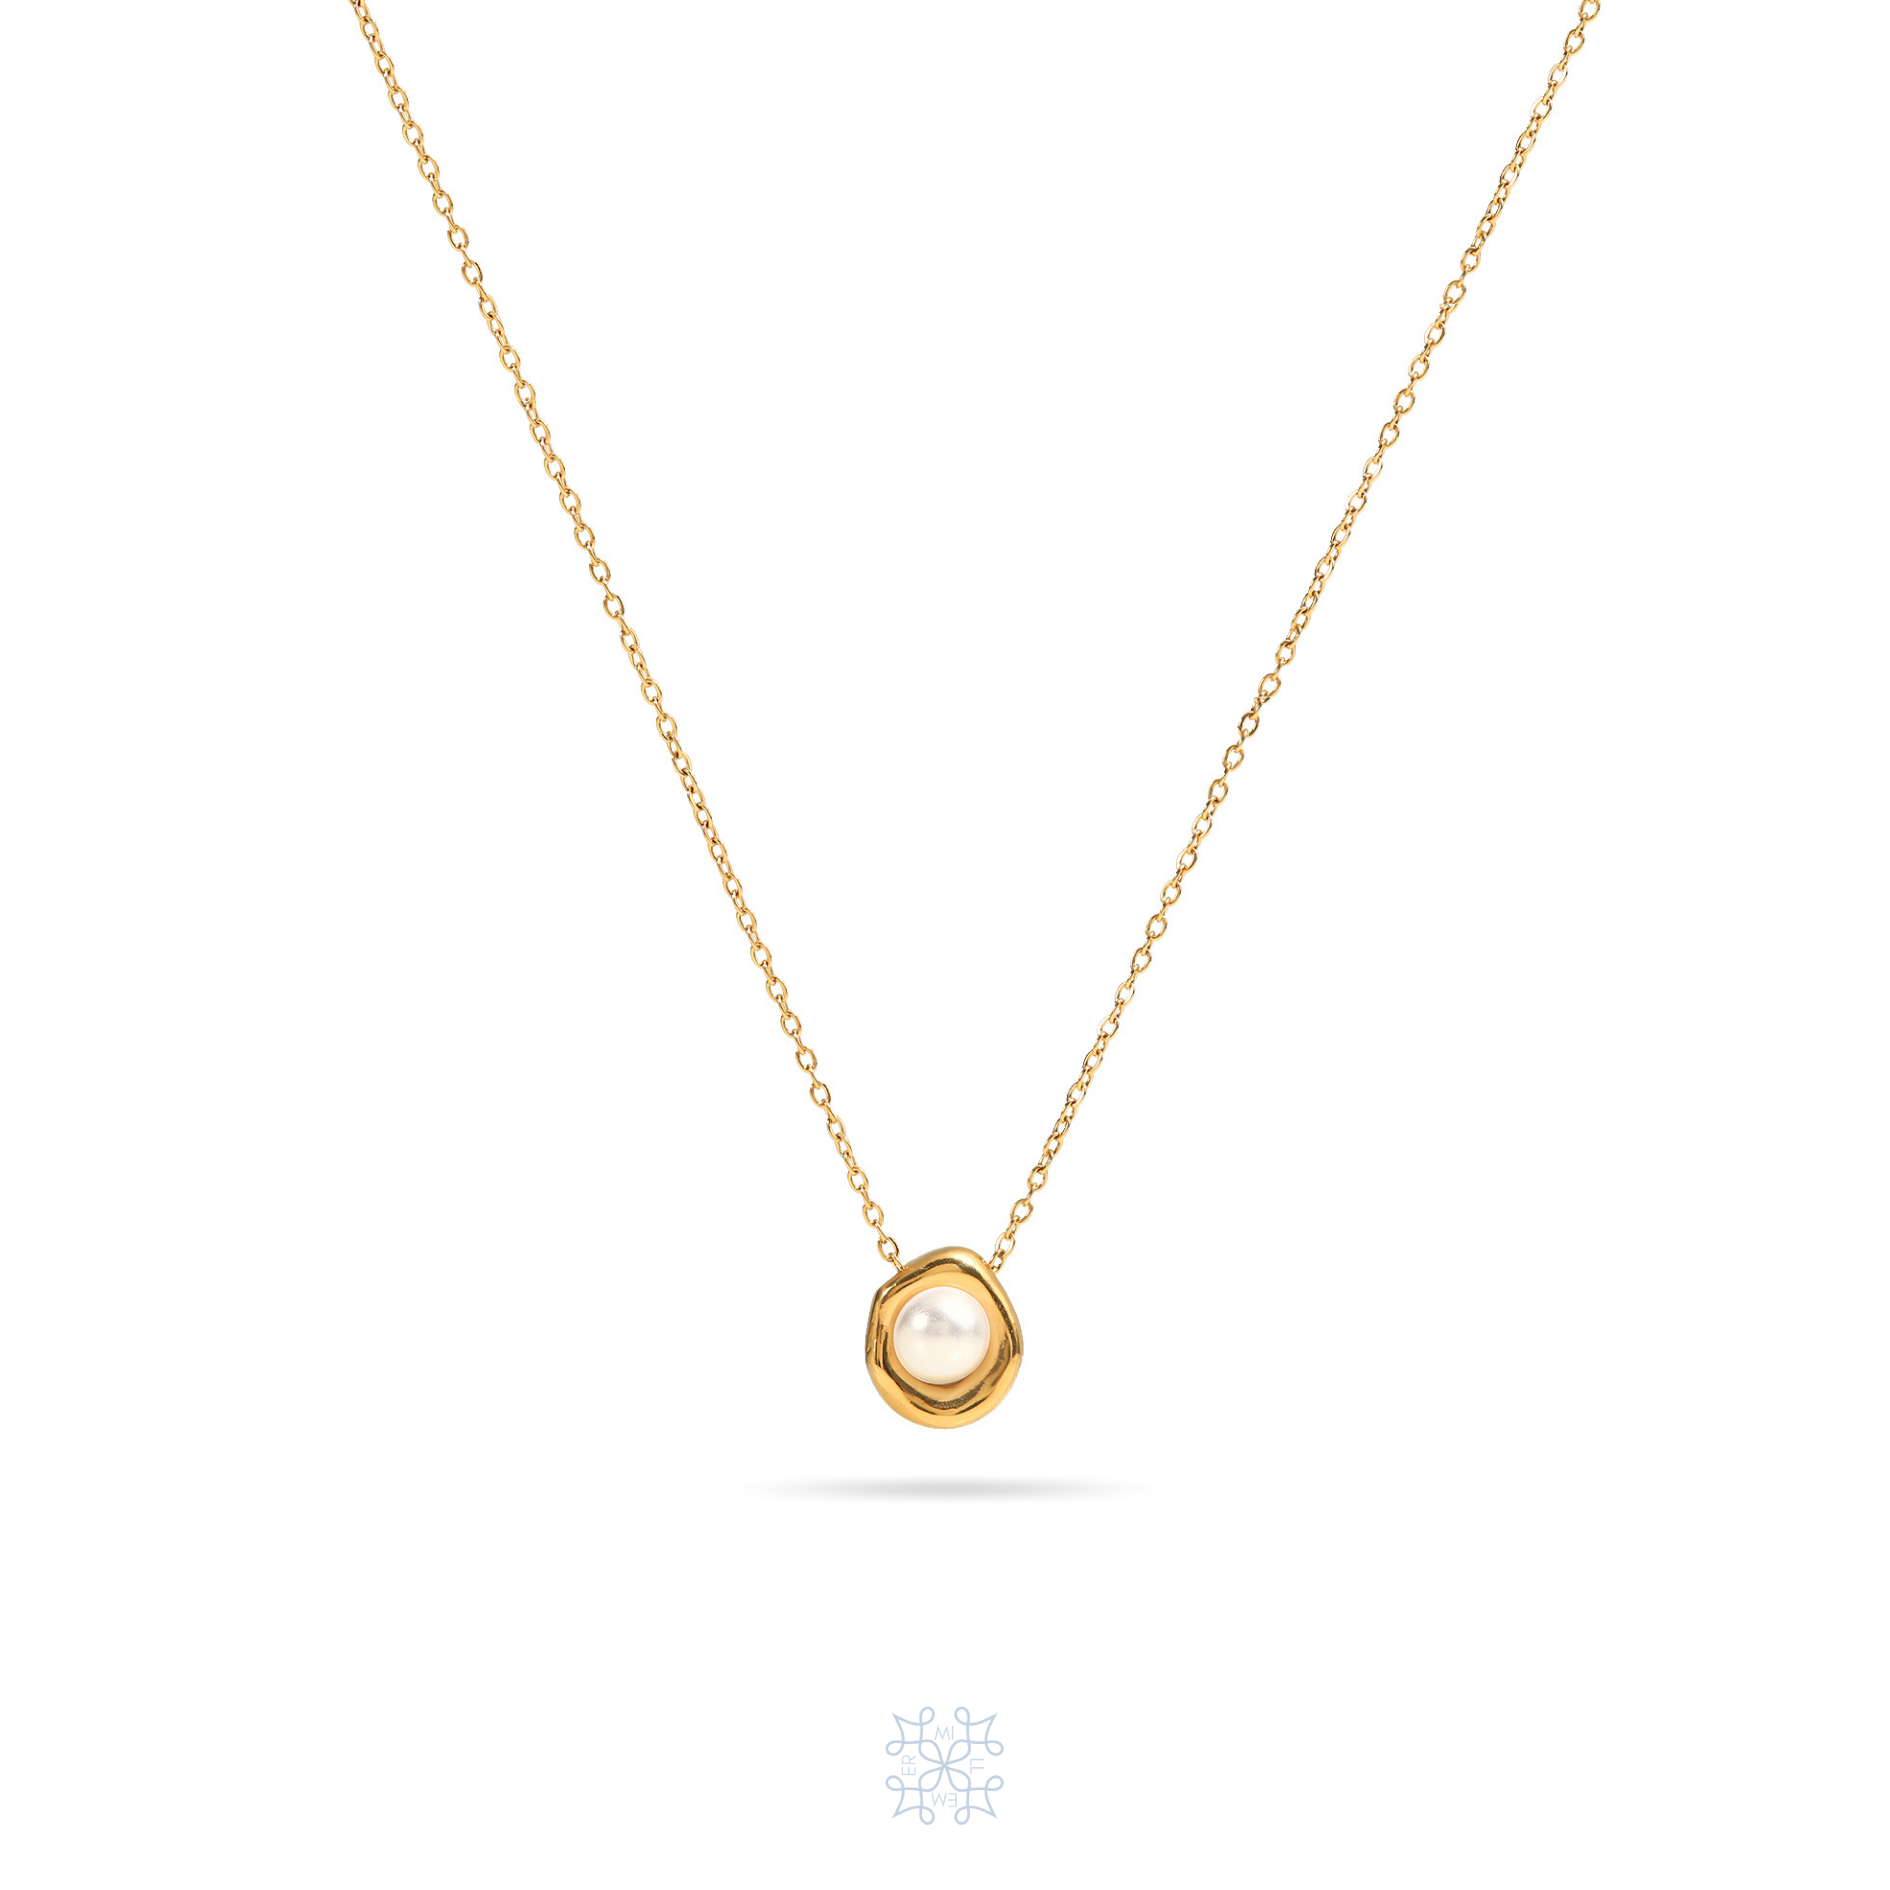 CLAM Pearl Gold Necklace - GOLD plated chain with a small pendant. Gold oval irregular shape with a white pearl in the middle.